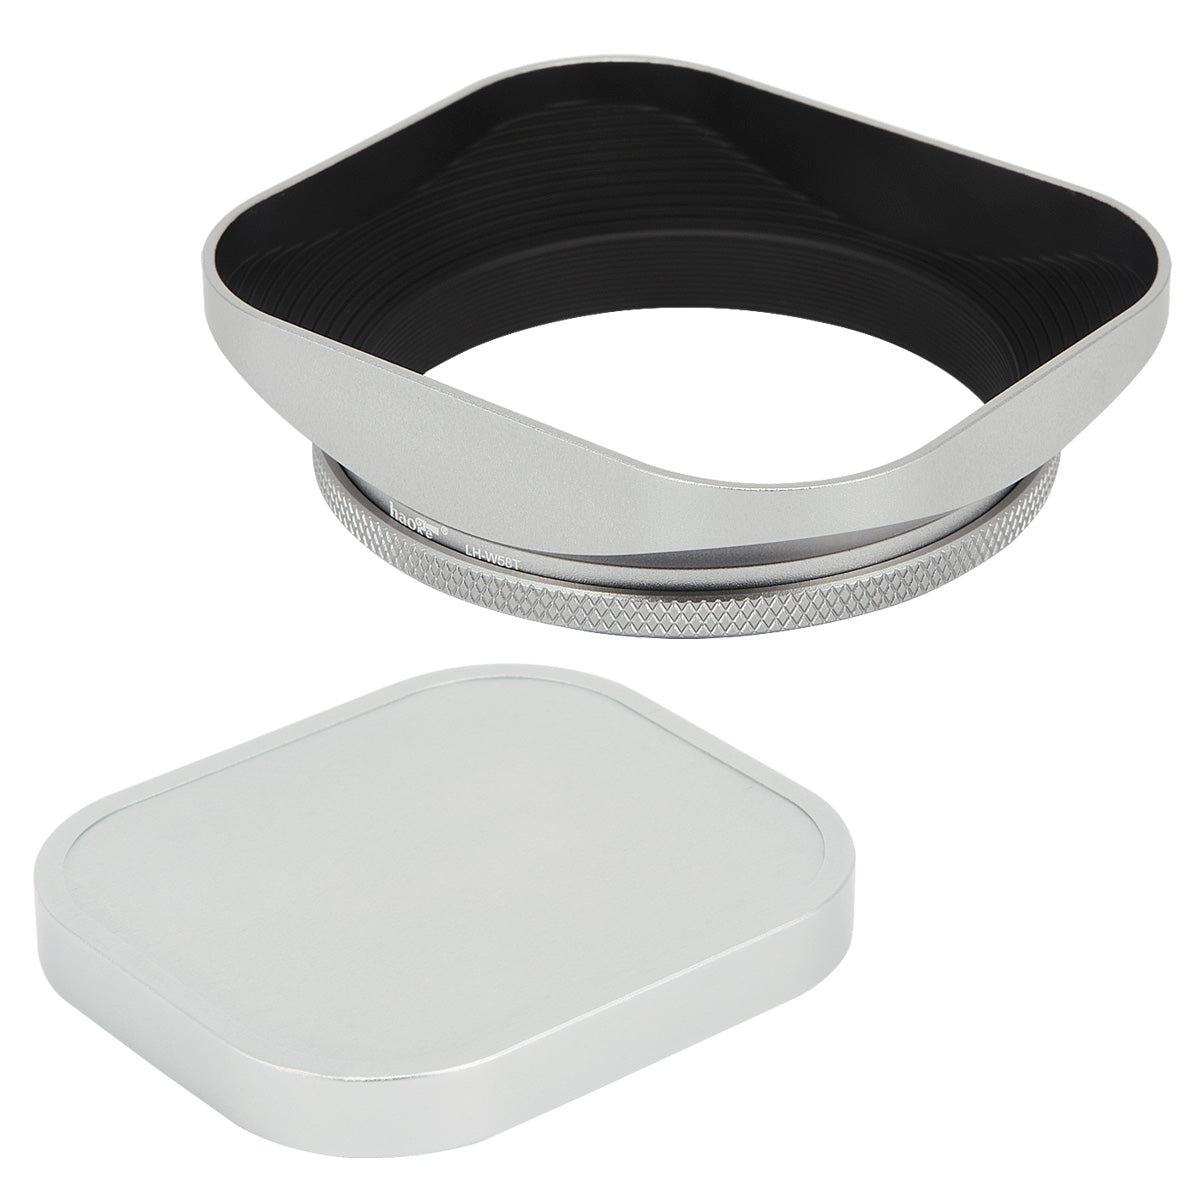 Haoge Cap-HG-36W Square Metal Cover Cap for Haoge Specific Square Lens Hood Silver